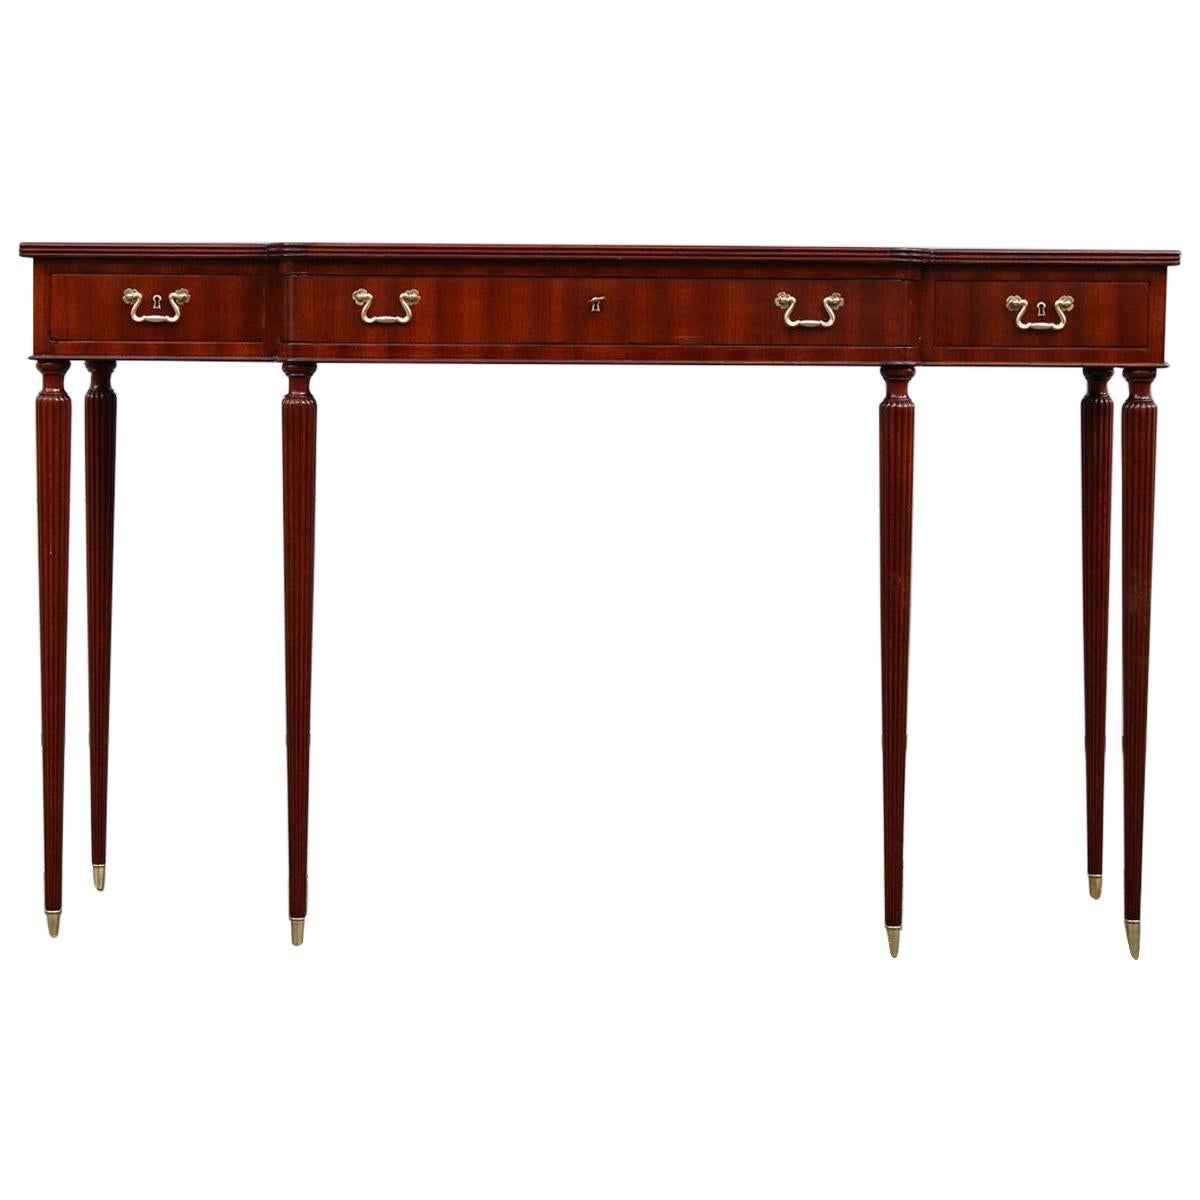 Elegant Italian Console of the Ducrot Manufacture in Mahogany with Three Drawers